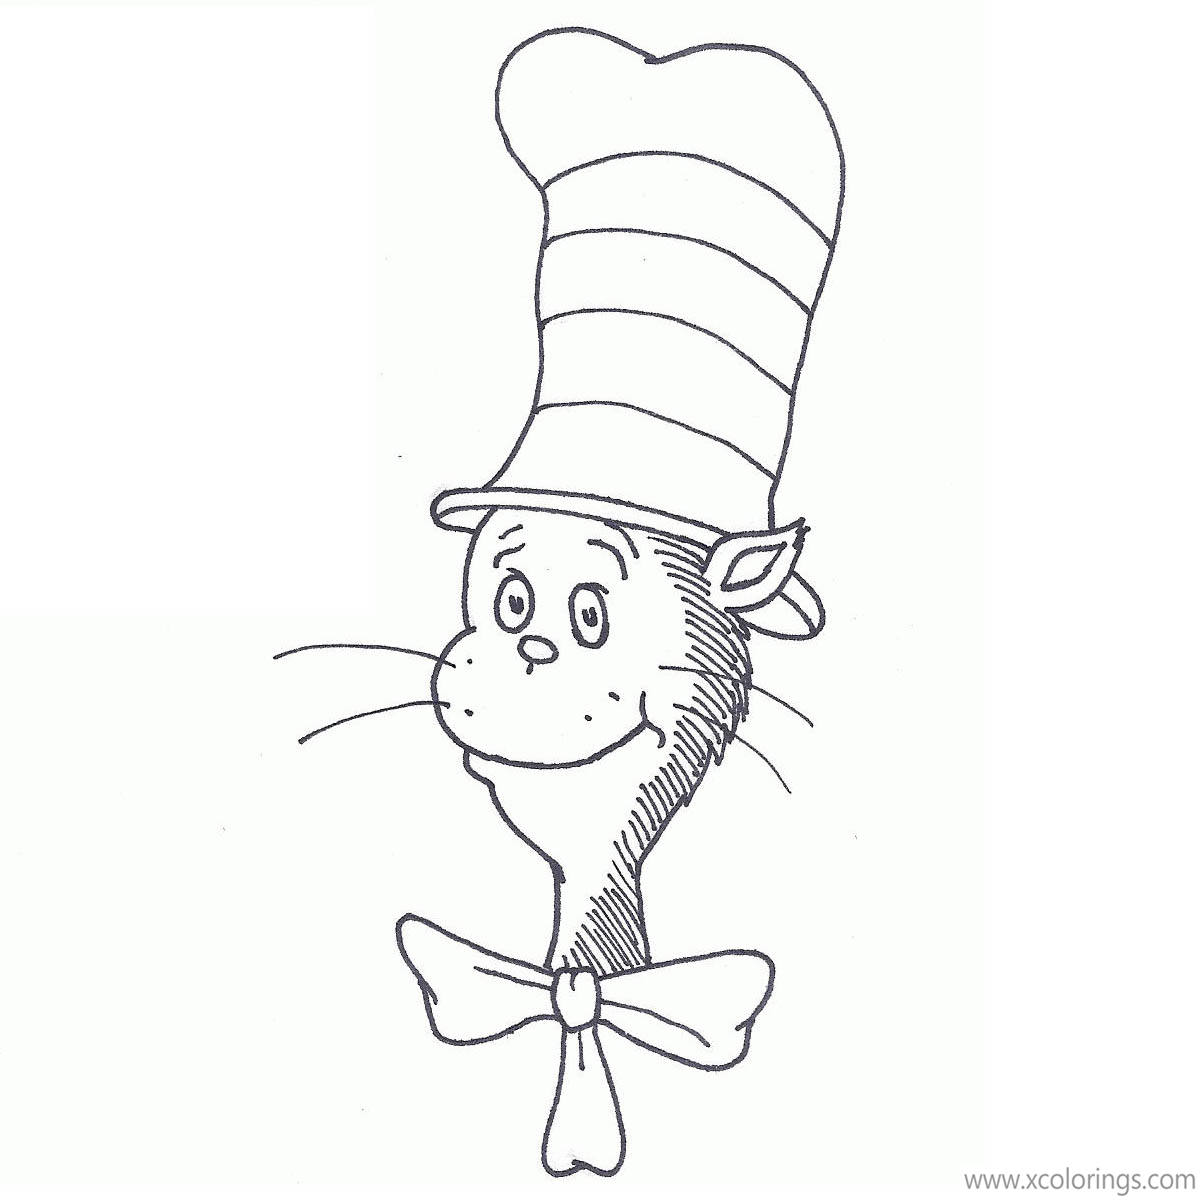 Cat In The Hat Coloring Pages Easy for Kids - XColorings.com